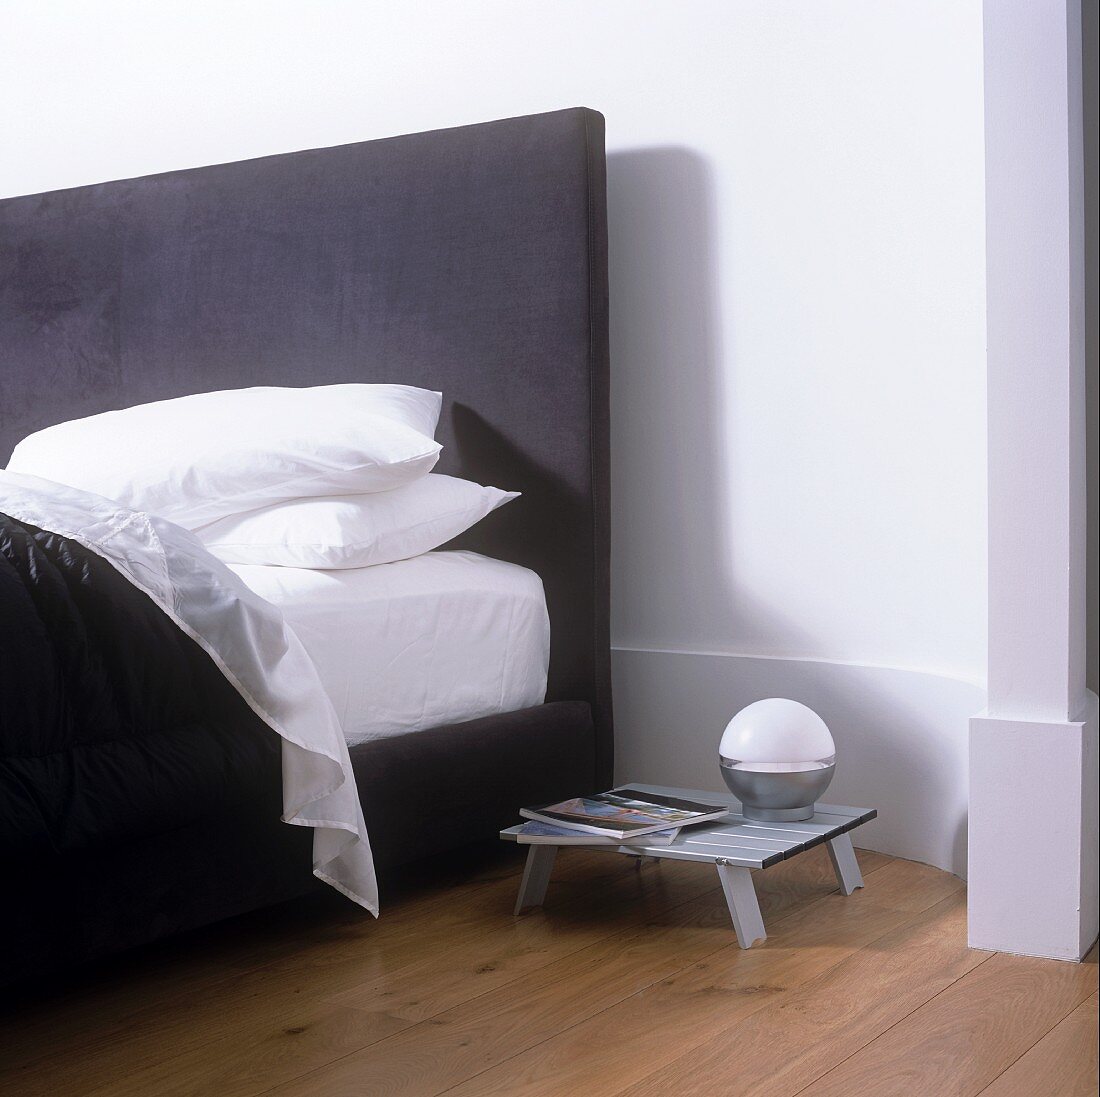 A stack of white cushions on a double bed with a black upholstered headboard and a mini bedside table